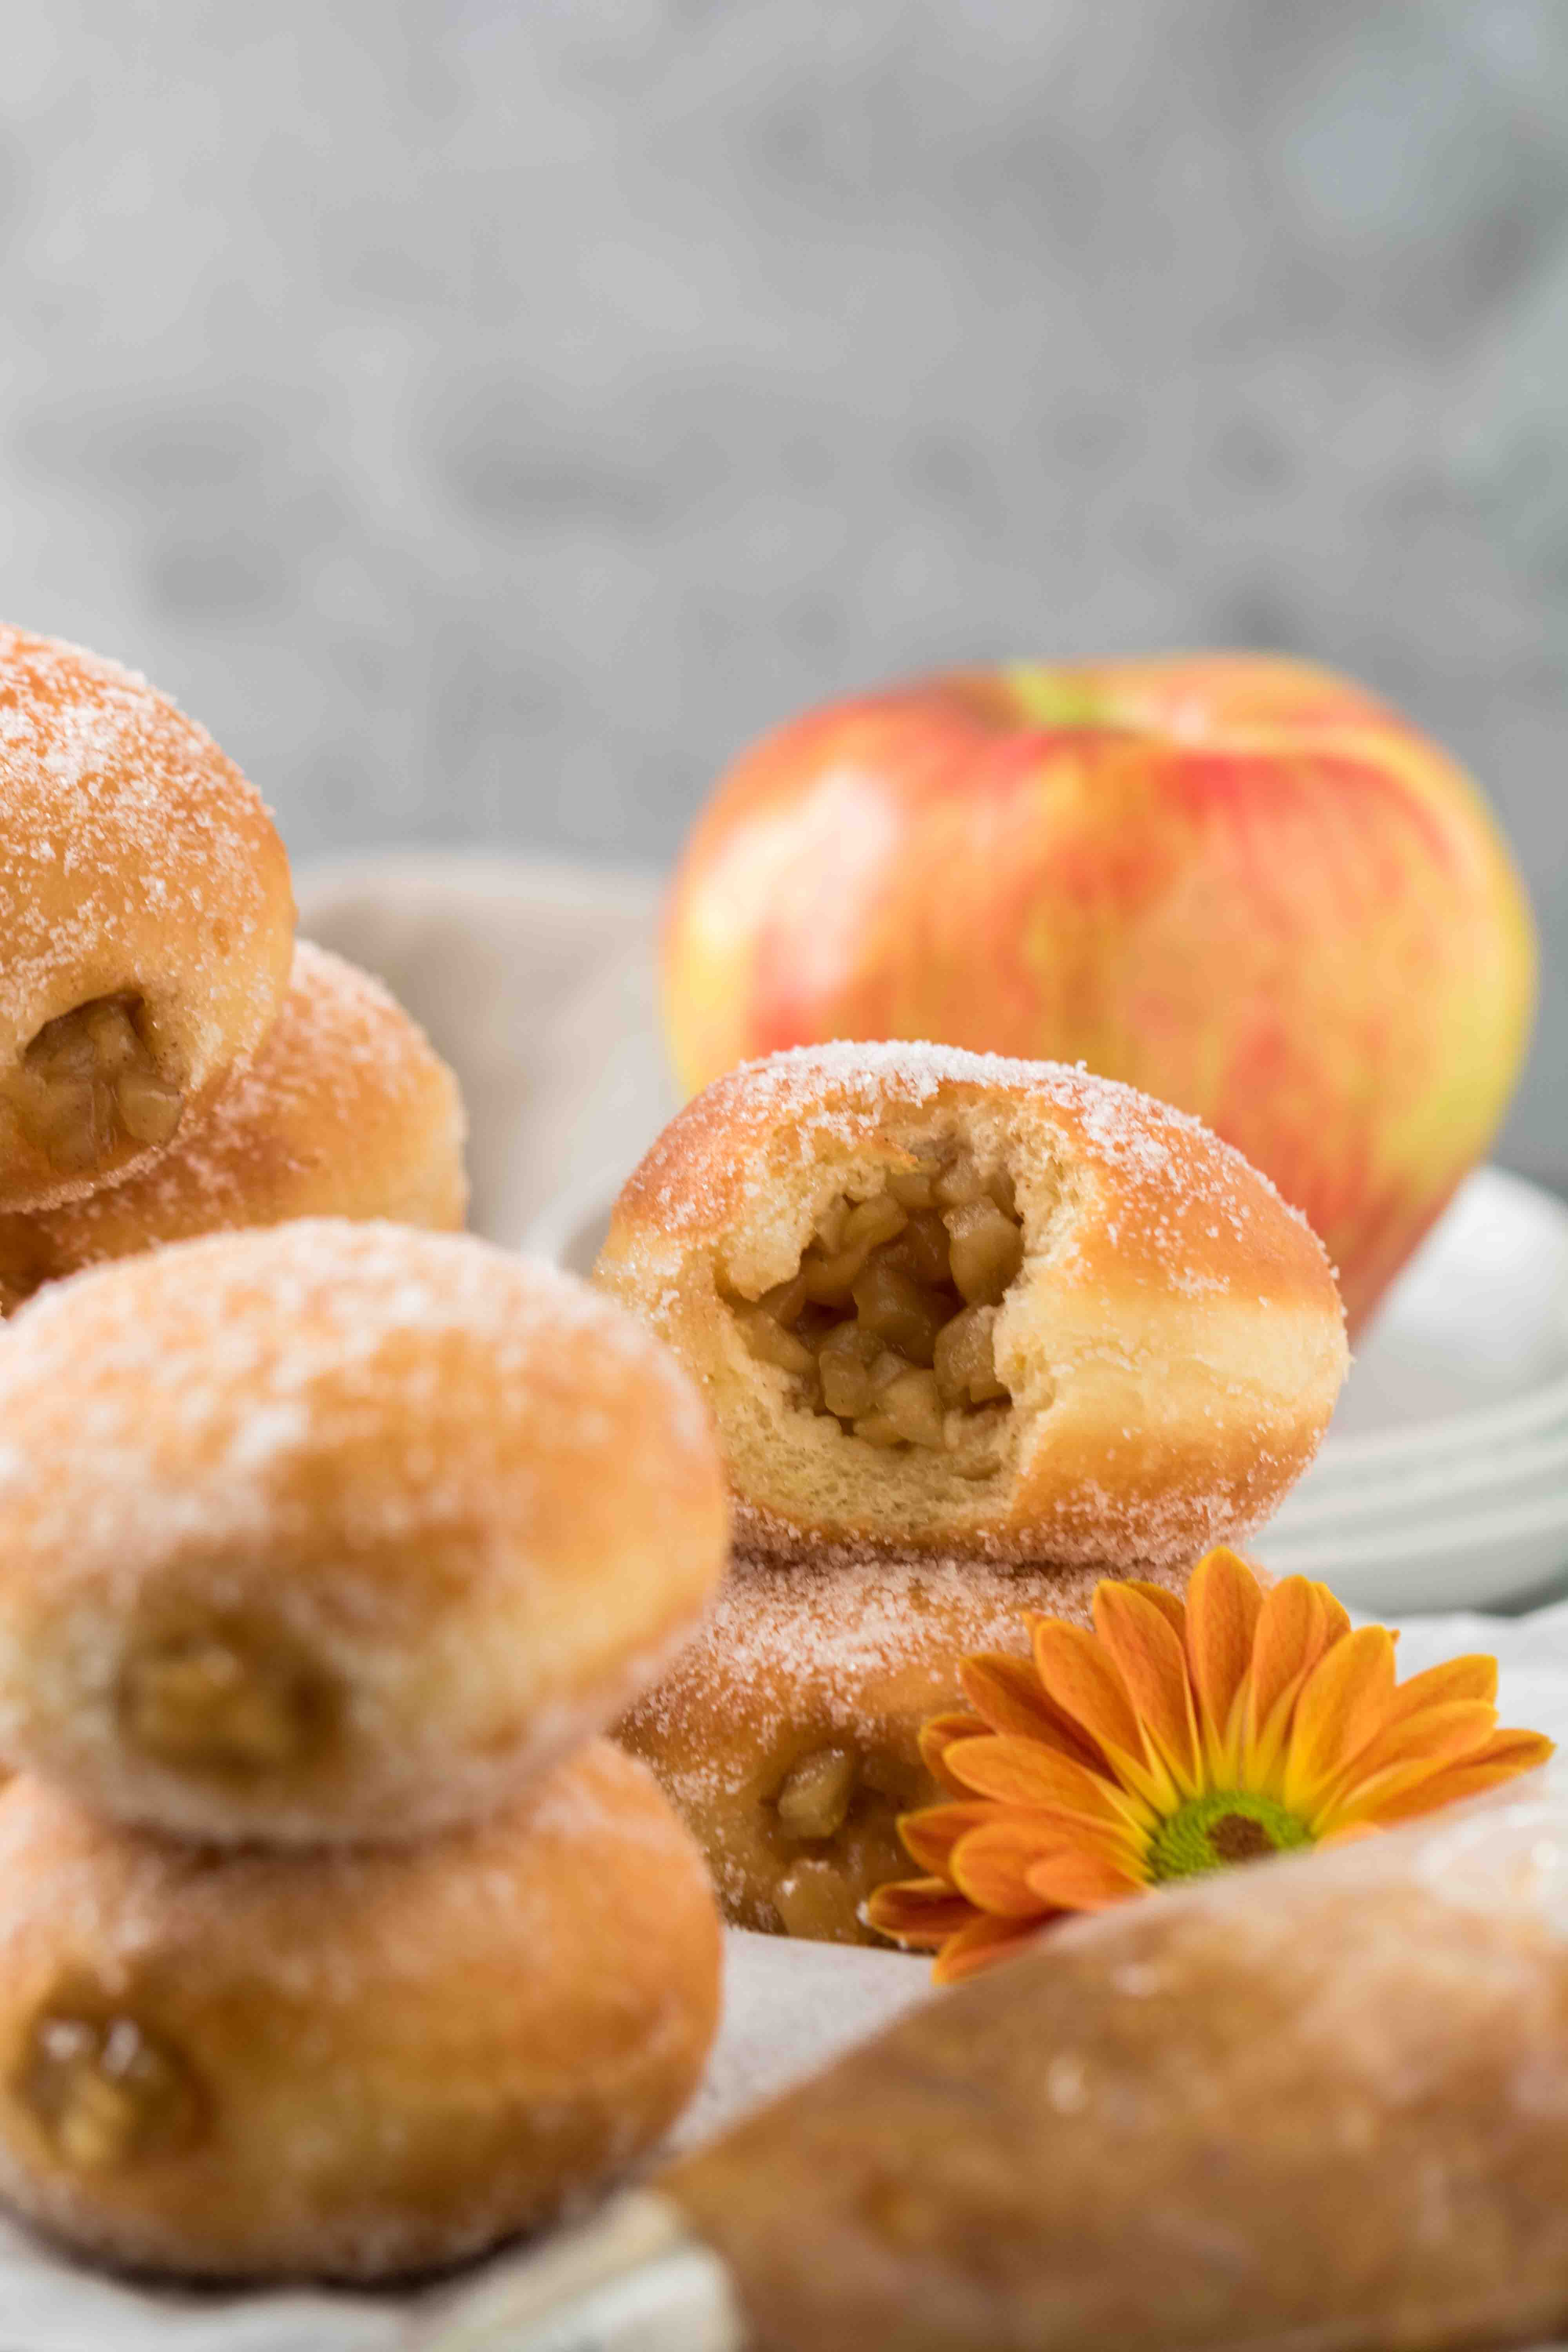 How to make donuts from scratch at home